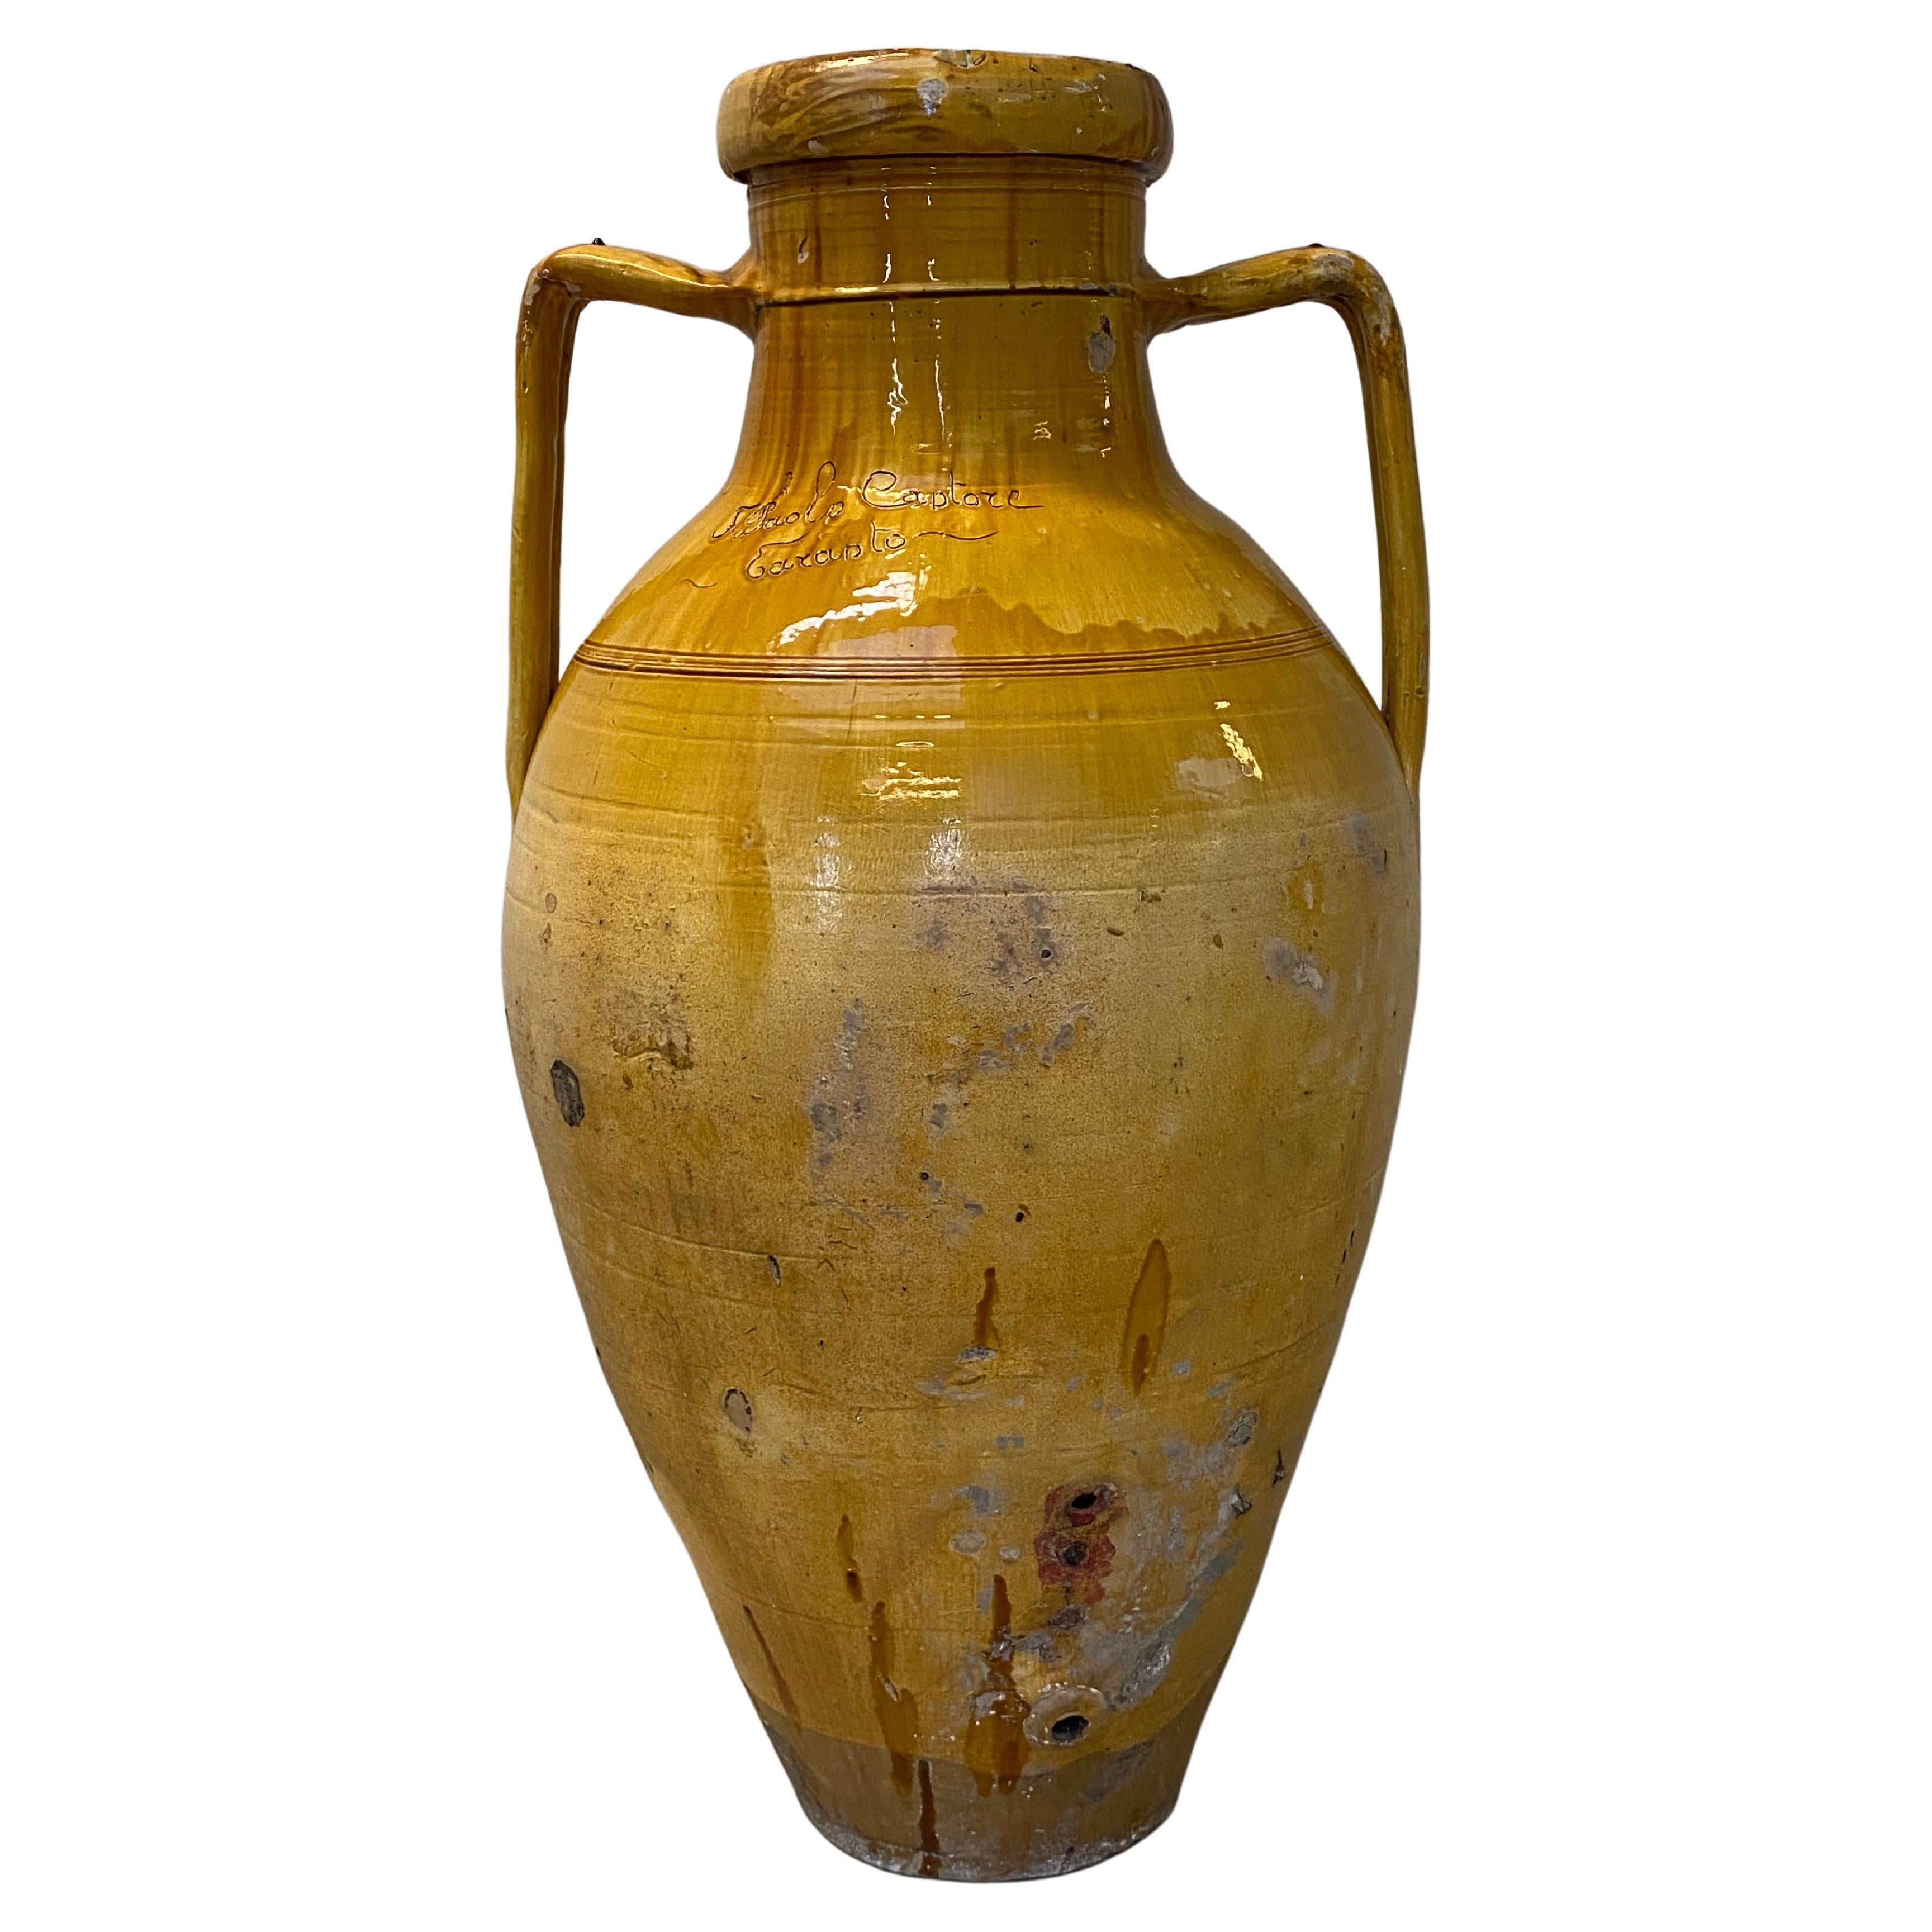 Exceptionally Big Italian Olive Jar with Yellow/Brown Color